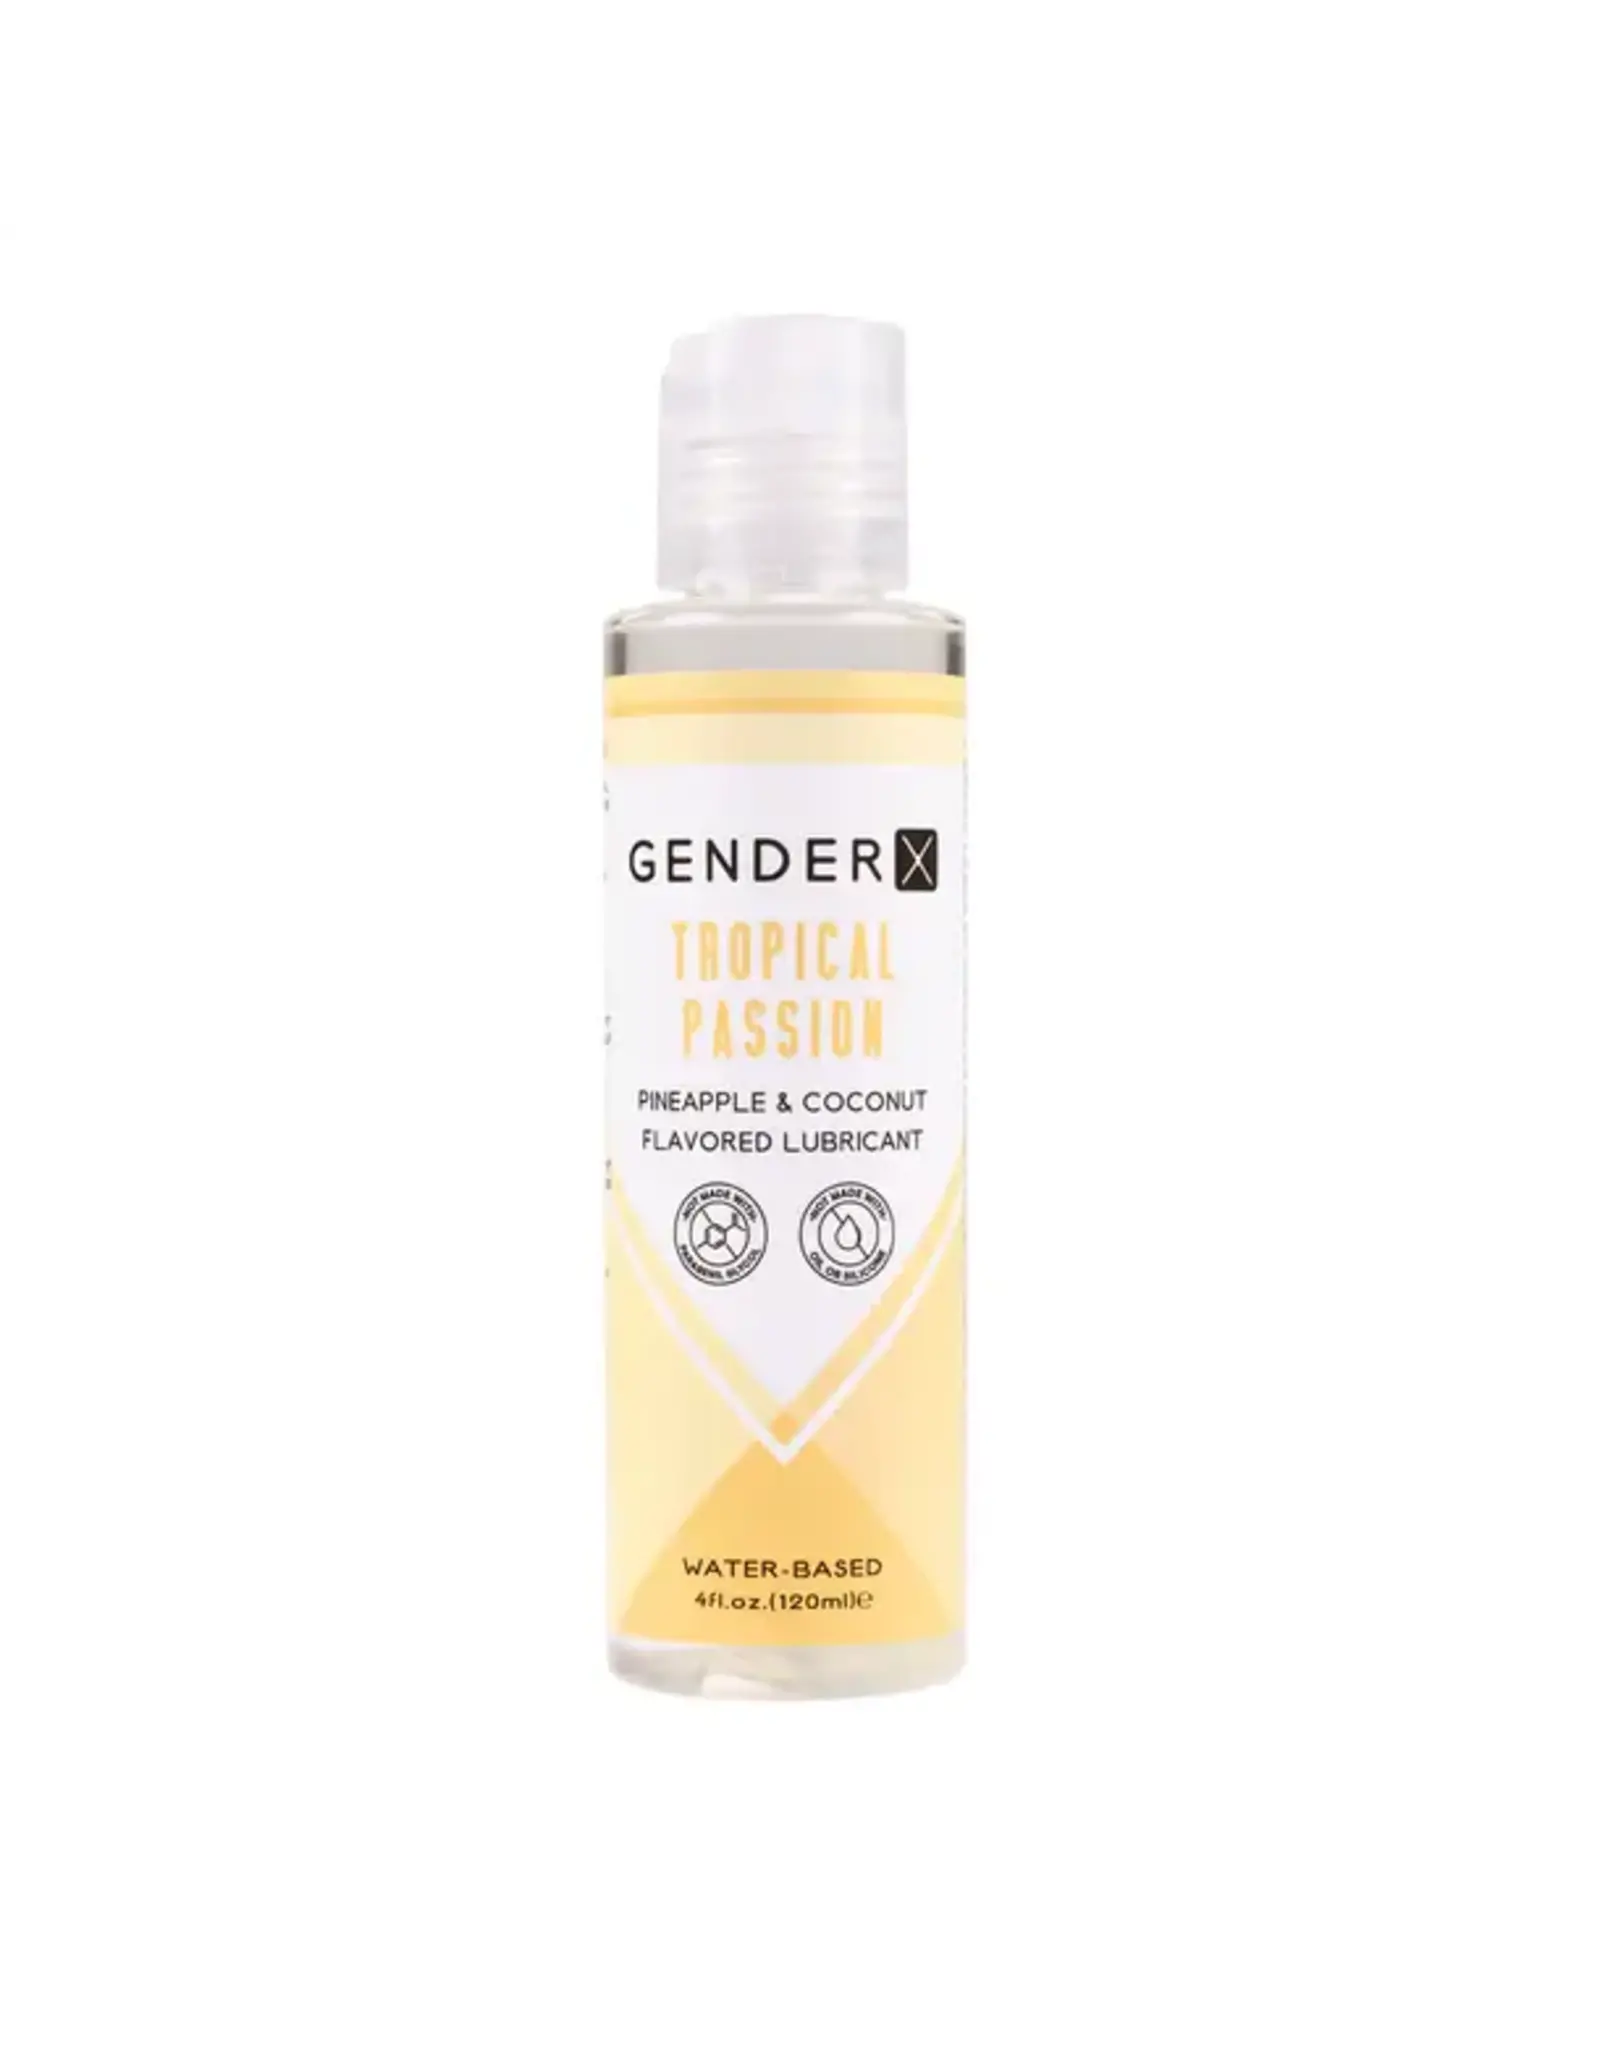 Gender X Gender X - Tropical Passion - Coconut & Pineapple Flavored Lubricant - 2 oz